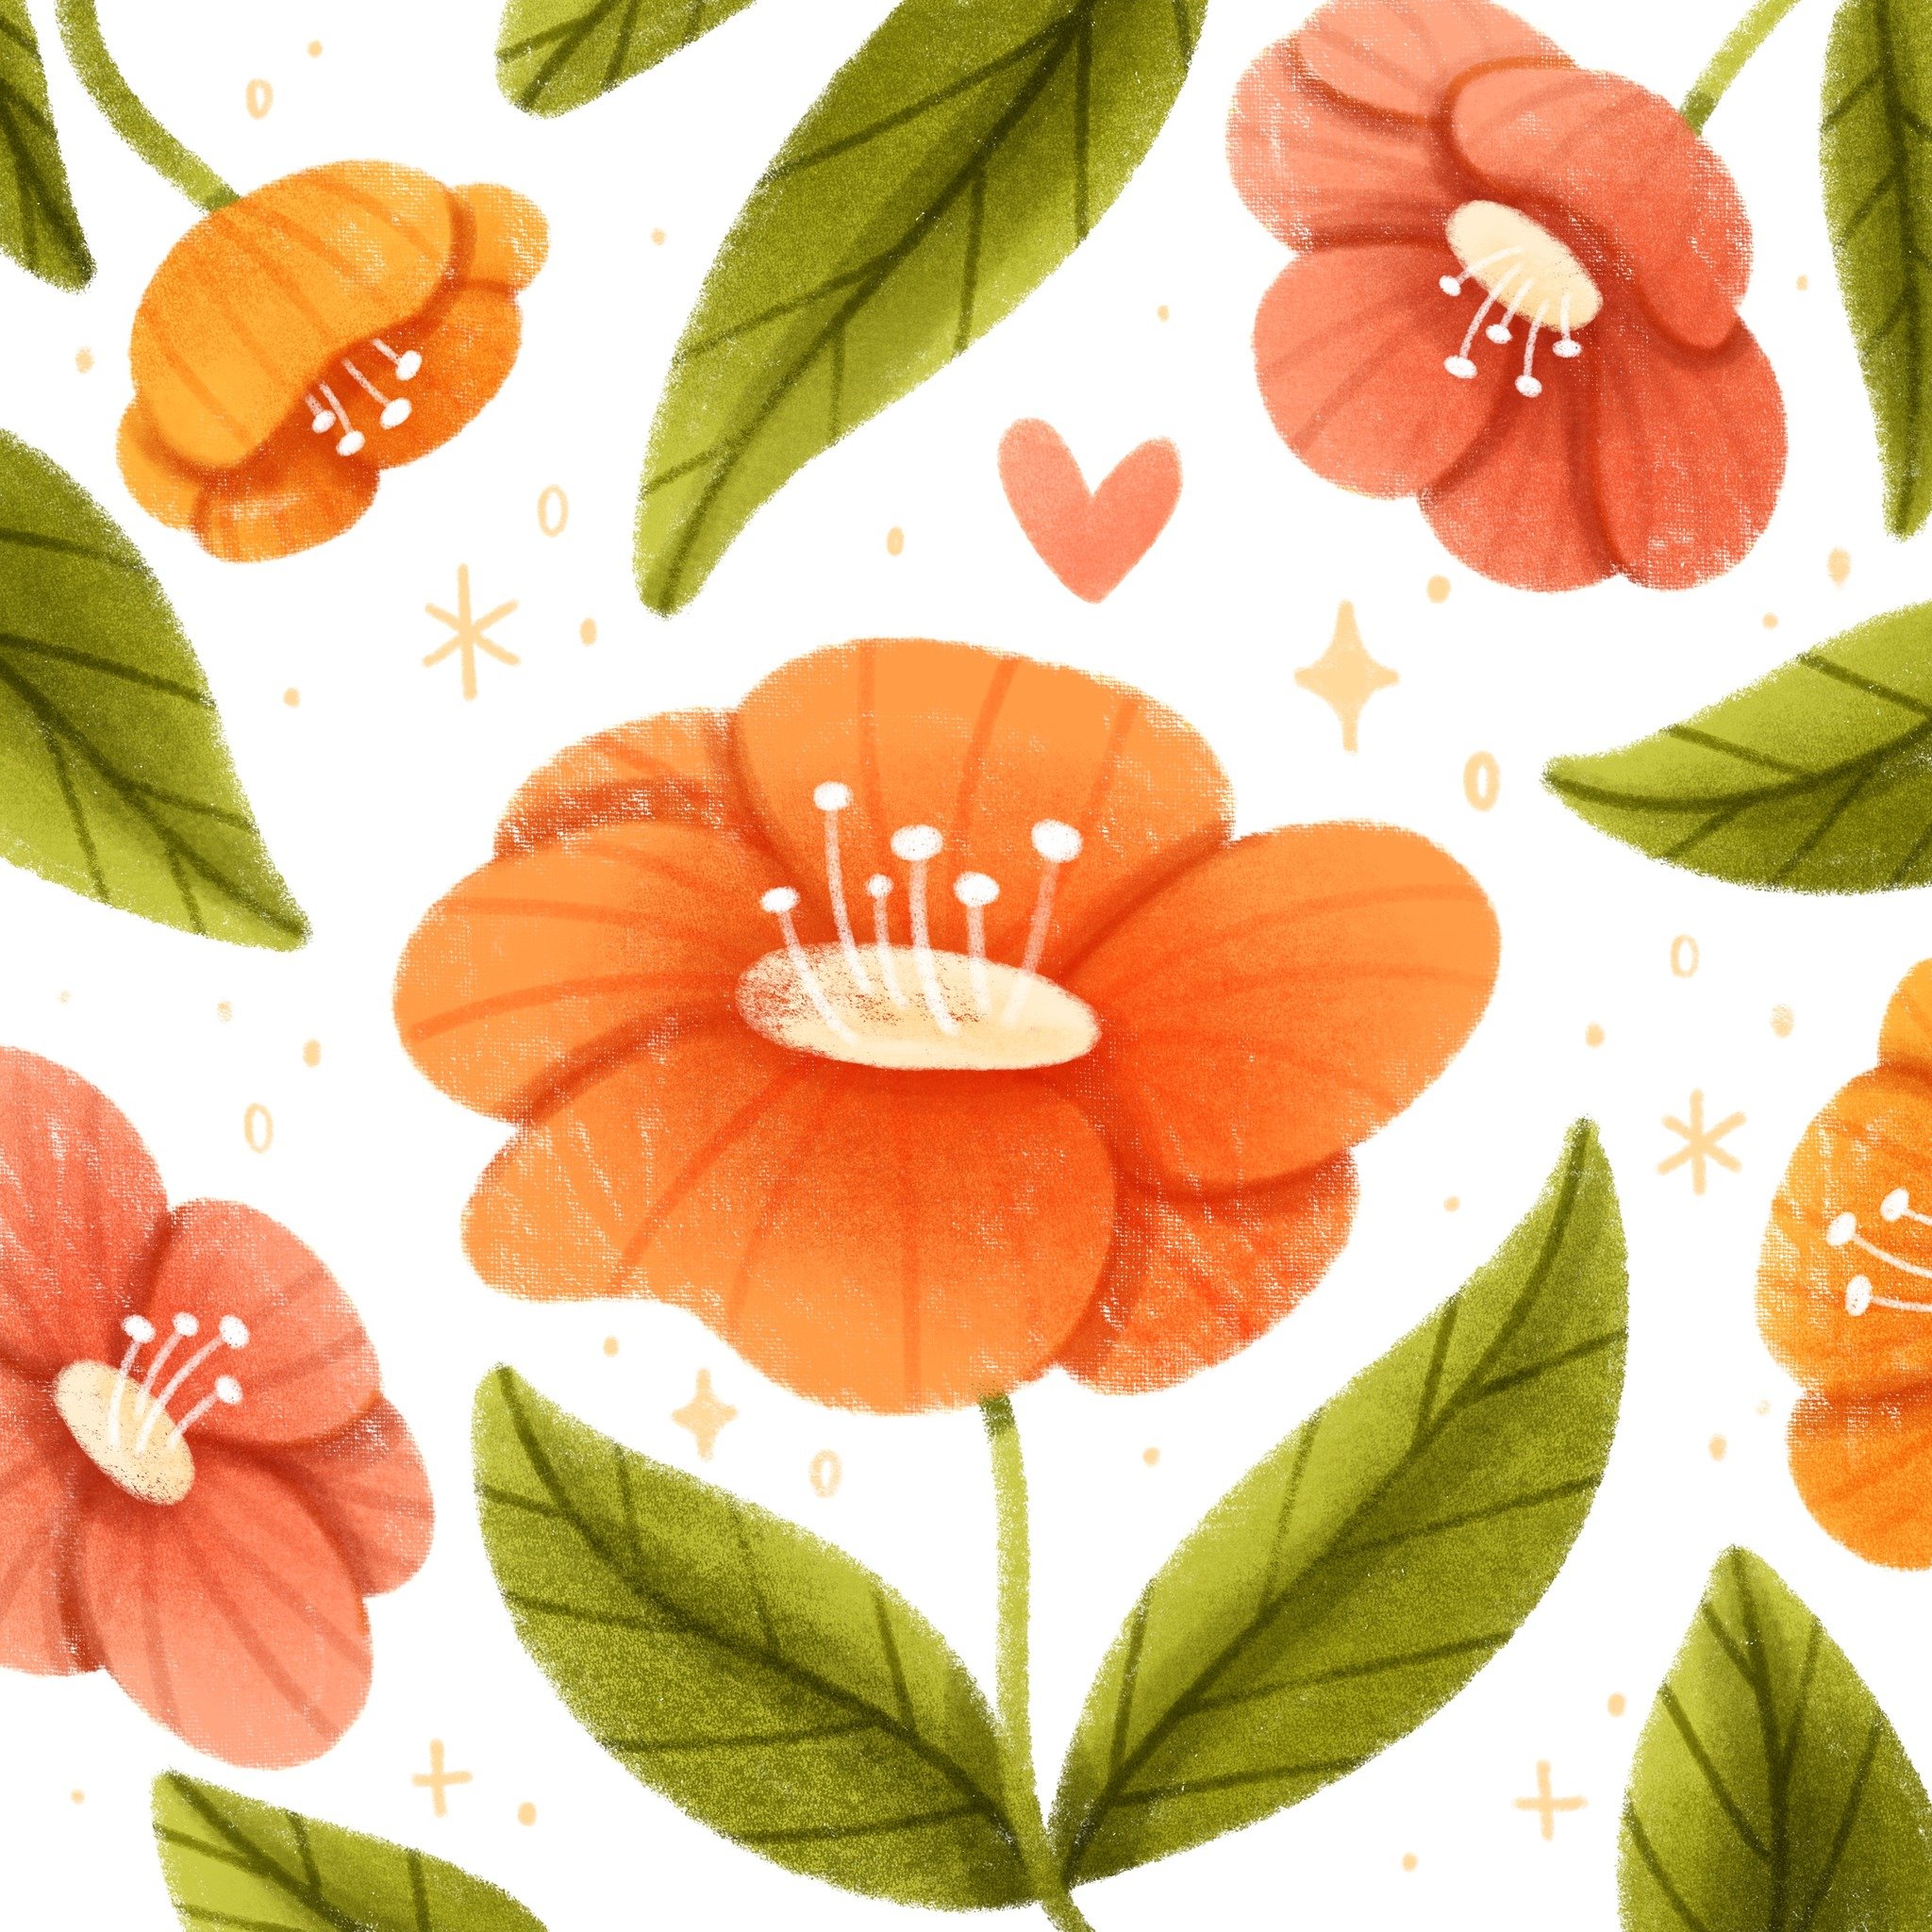 Some flowers I drew in Procreate with my new brushes - I think they'd make a lovely pattern!

Swipe across for a texture closeup (I'm obsessed) 😍

Brushes I used (from my brush packs):
🌷 Mimi Simple Sketching for initial sketch
🌷 Mimi Canvas Brush